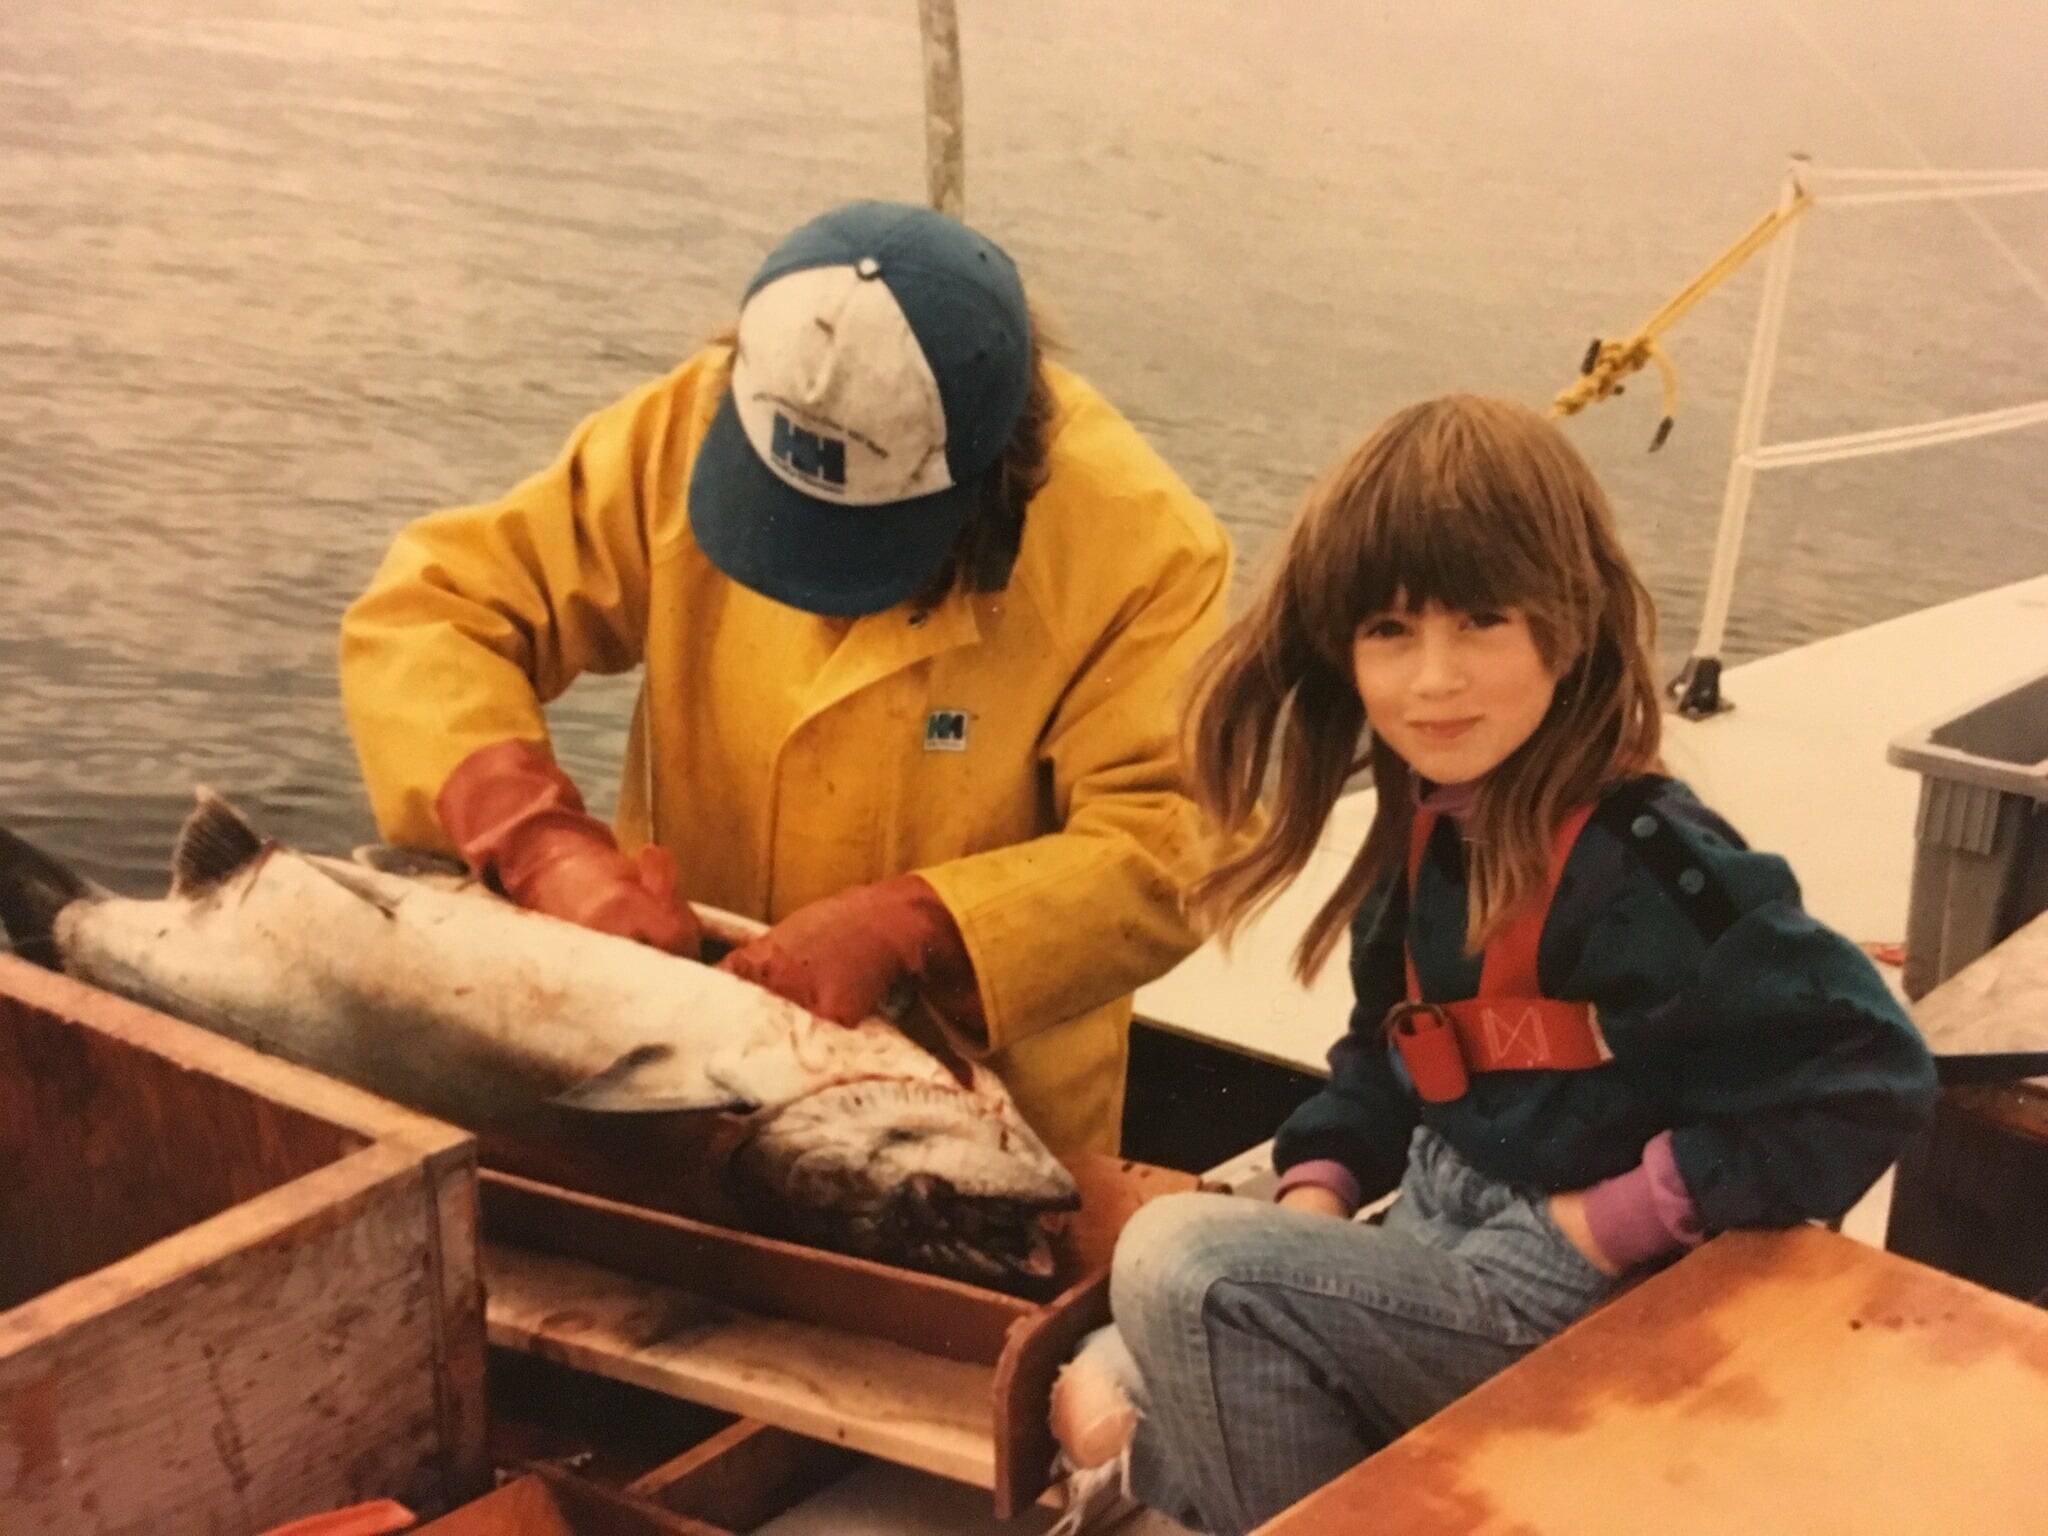 A young Tele Aadsen with her father Ken Aadsen on the family’s 40-foot trimaran hand troller in 1985. Aadsen, a commercial fisher and author of “What Water Holds,” will be visiting Hearthside Books downtown at 6 p.m. on Sunday, Sept. 17. (Photo courtesy Val Aadsen)